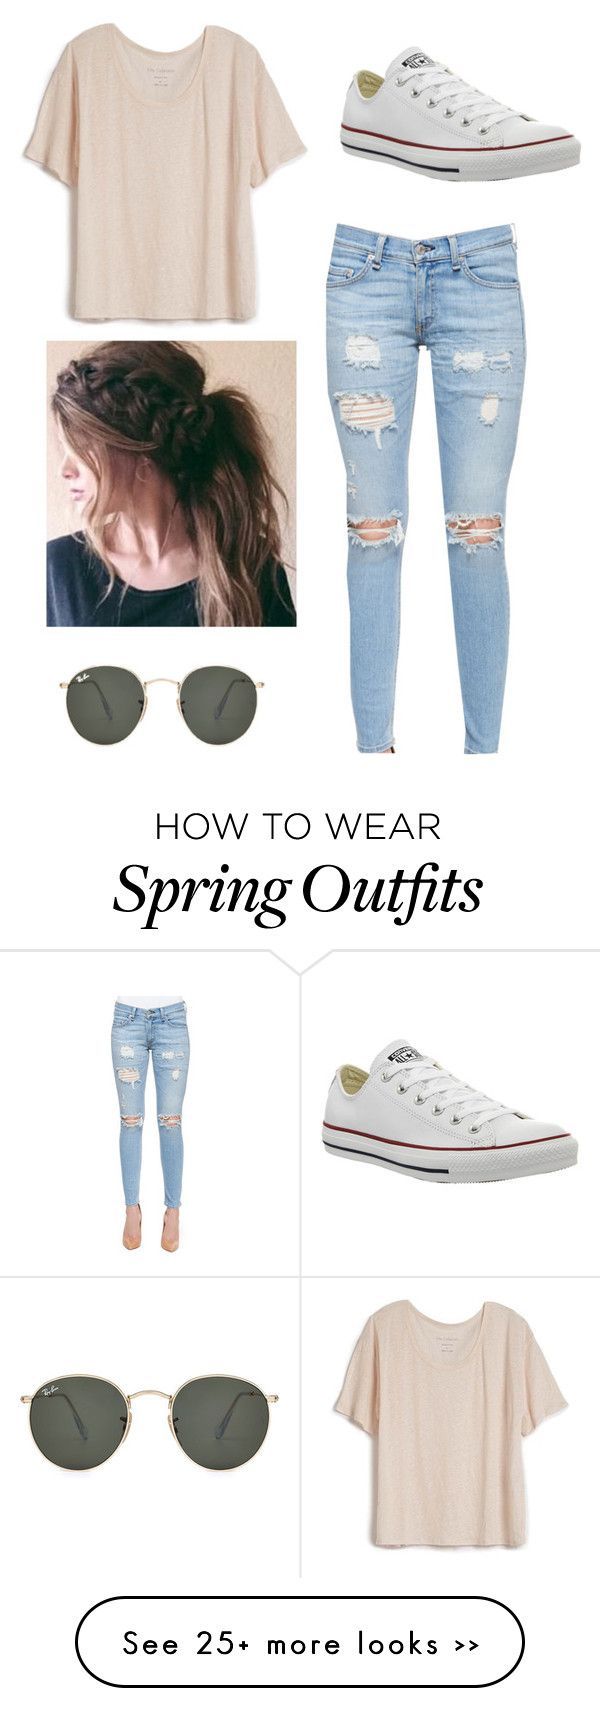 “Spring outfit 3” by jessie-taylor-i on Polyvore